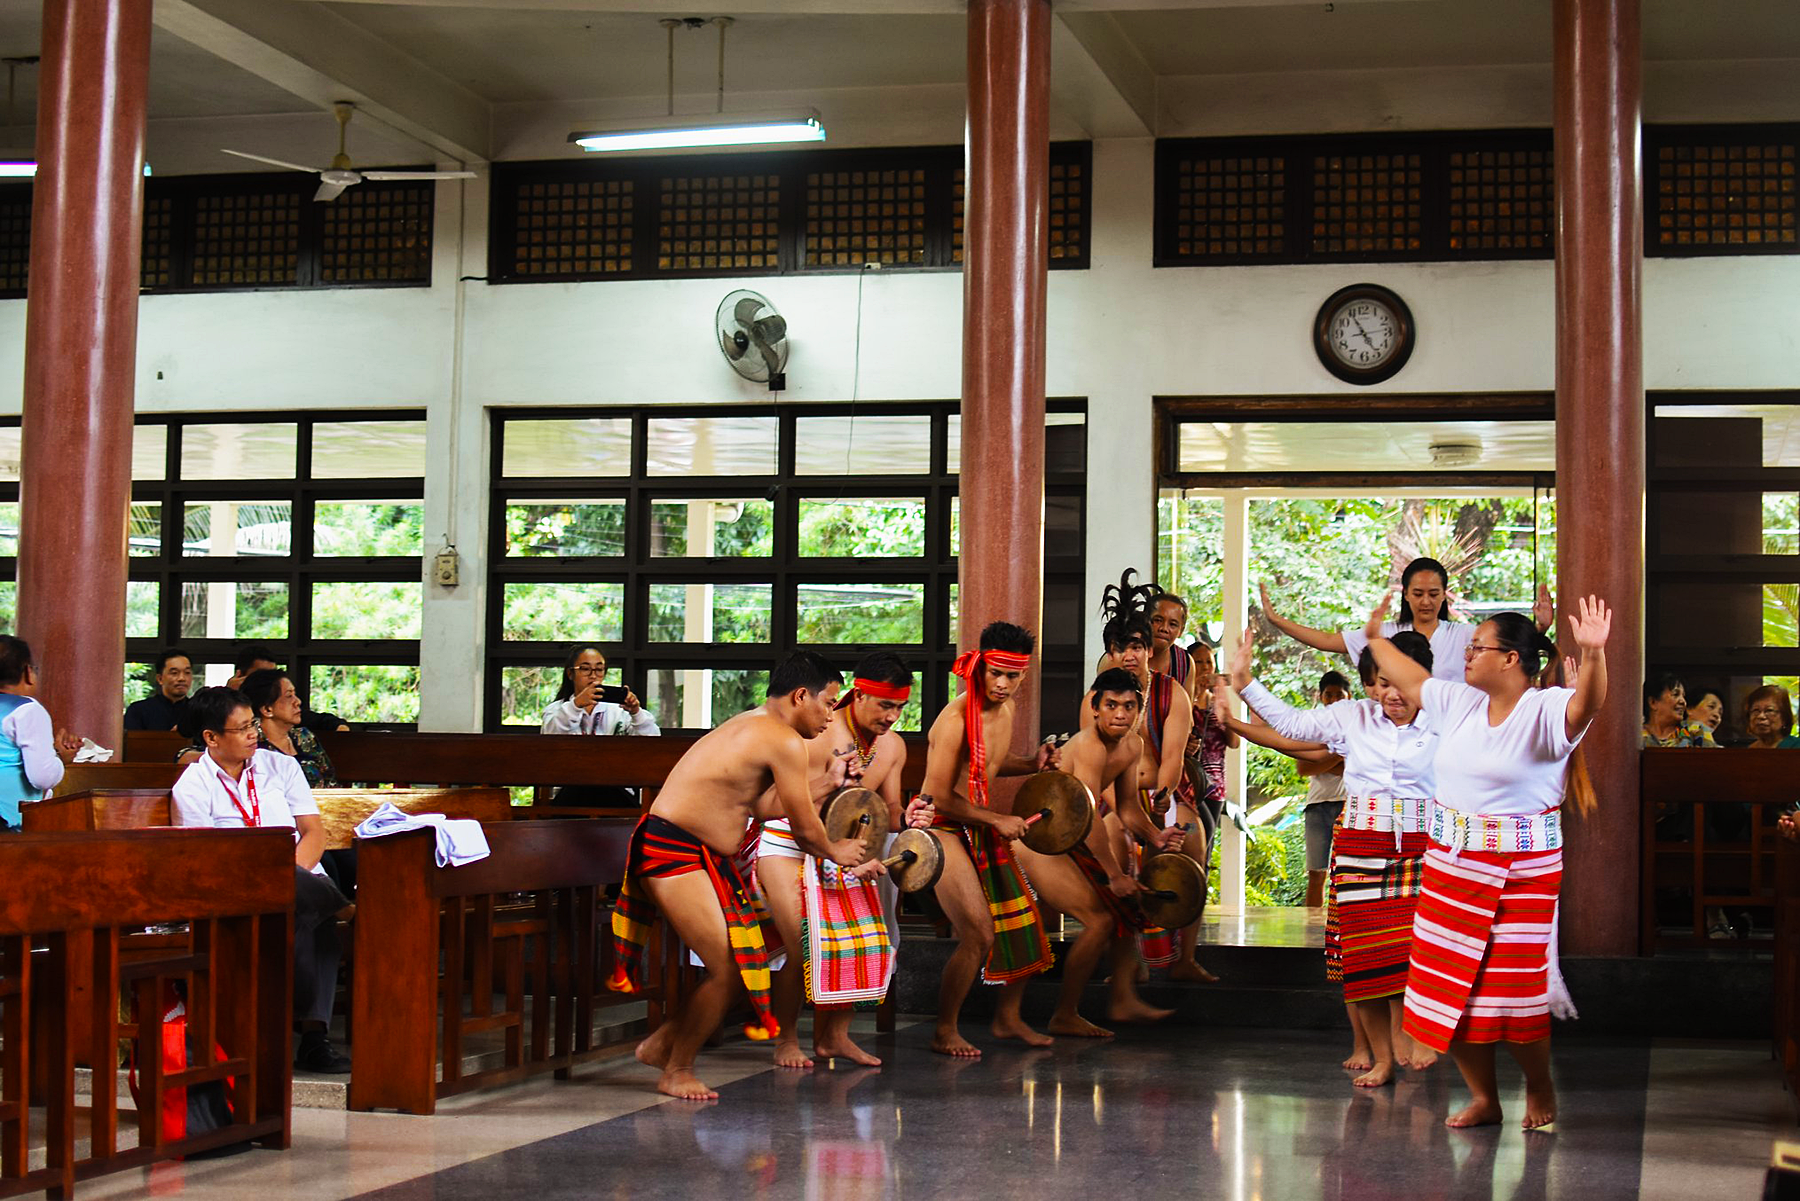 IPMSDL performing an indigenous dance in a large community hall.